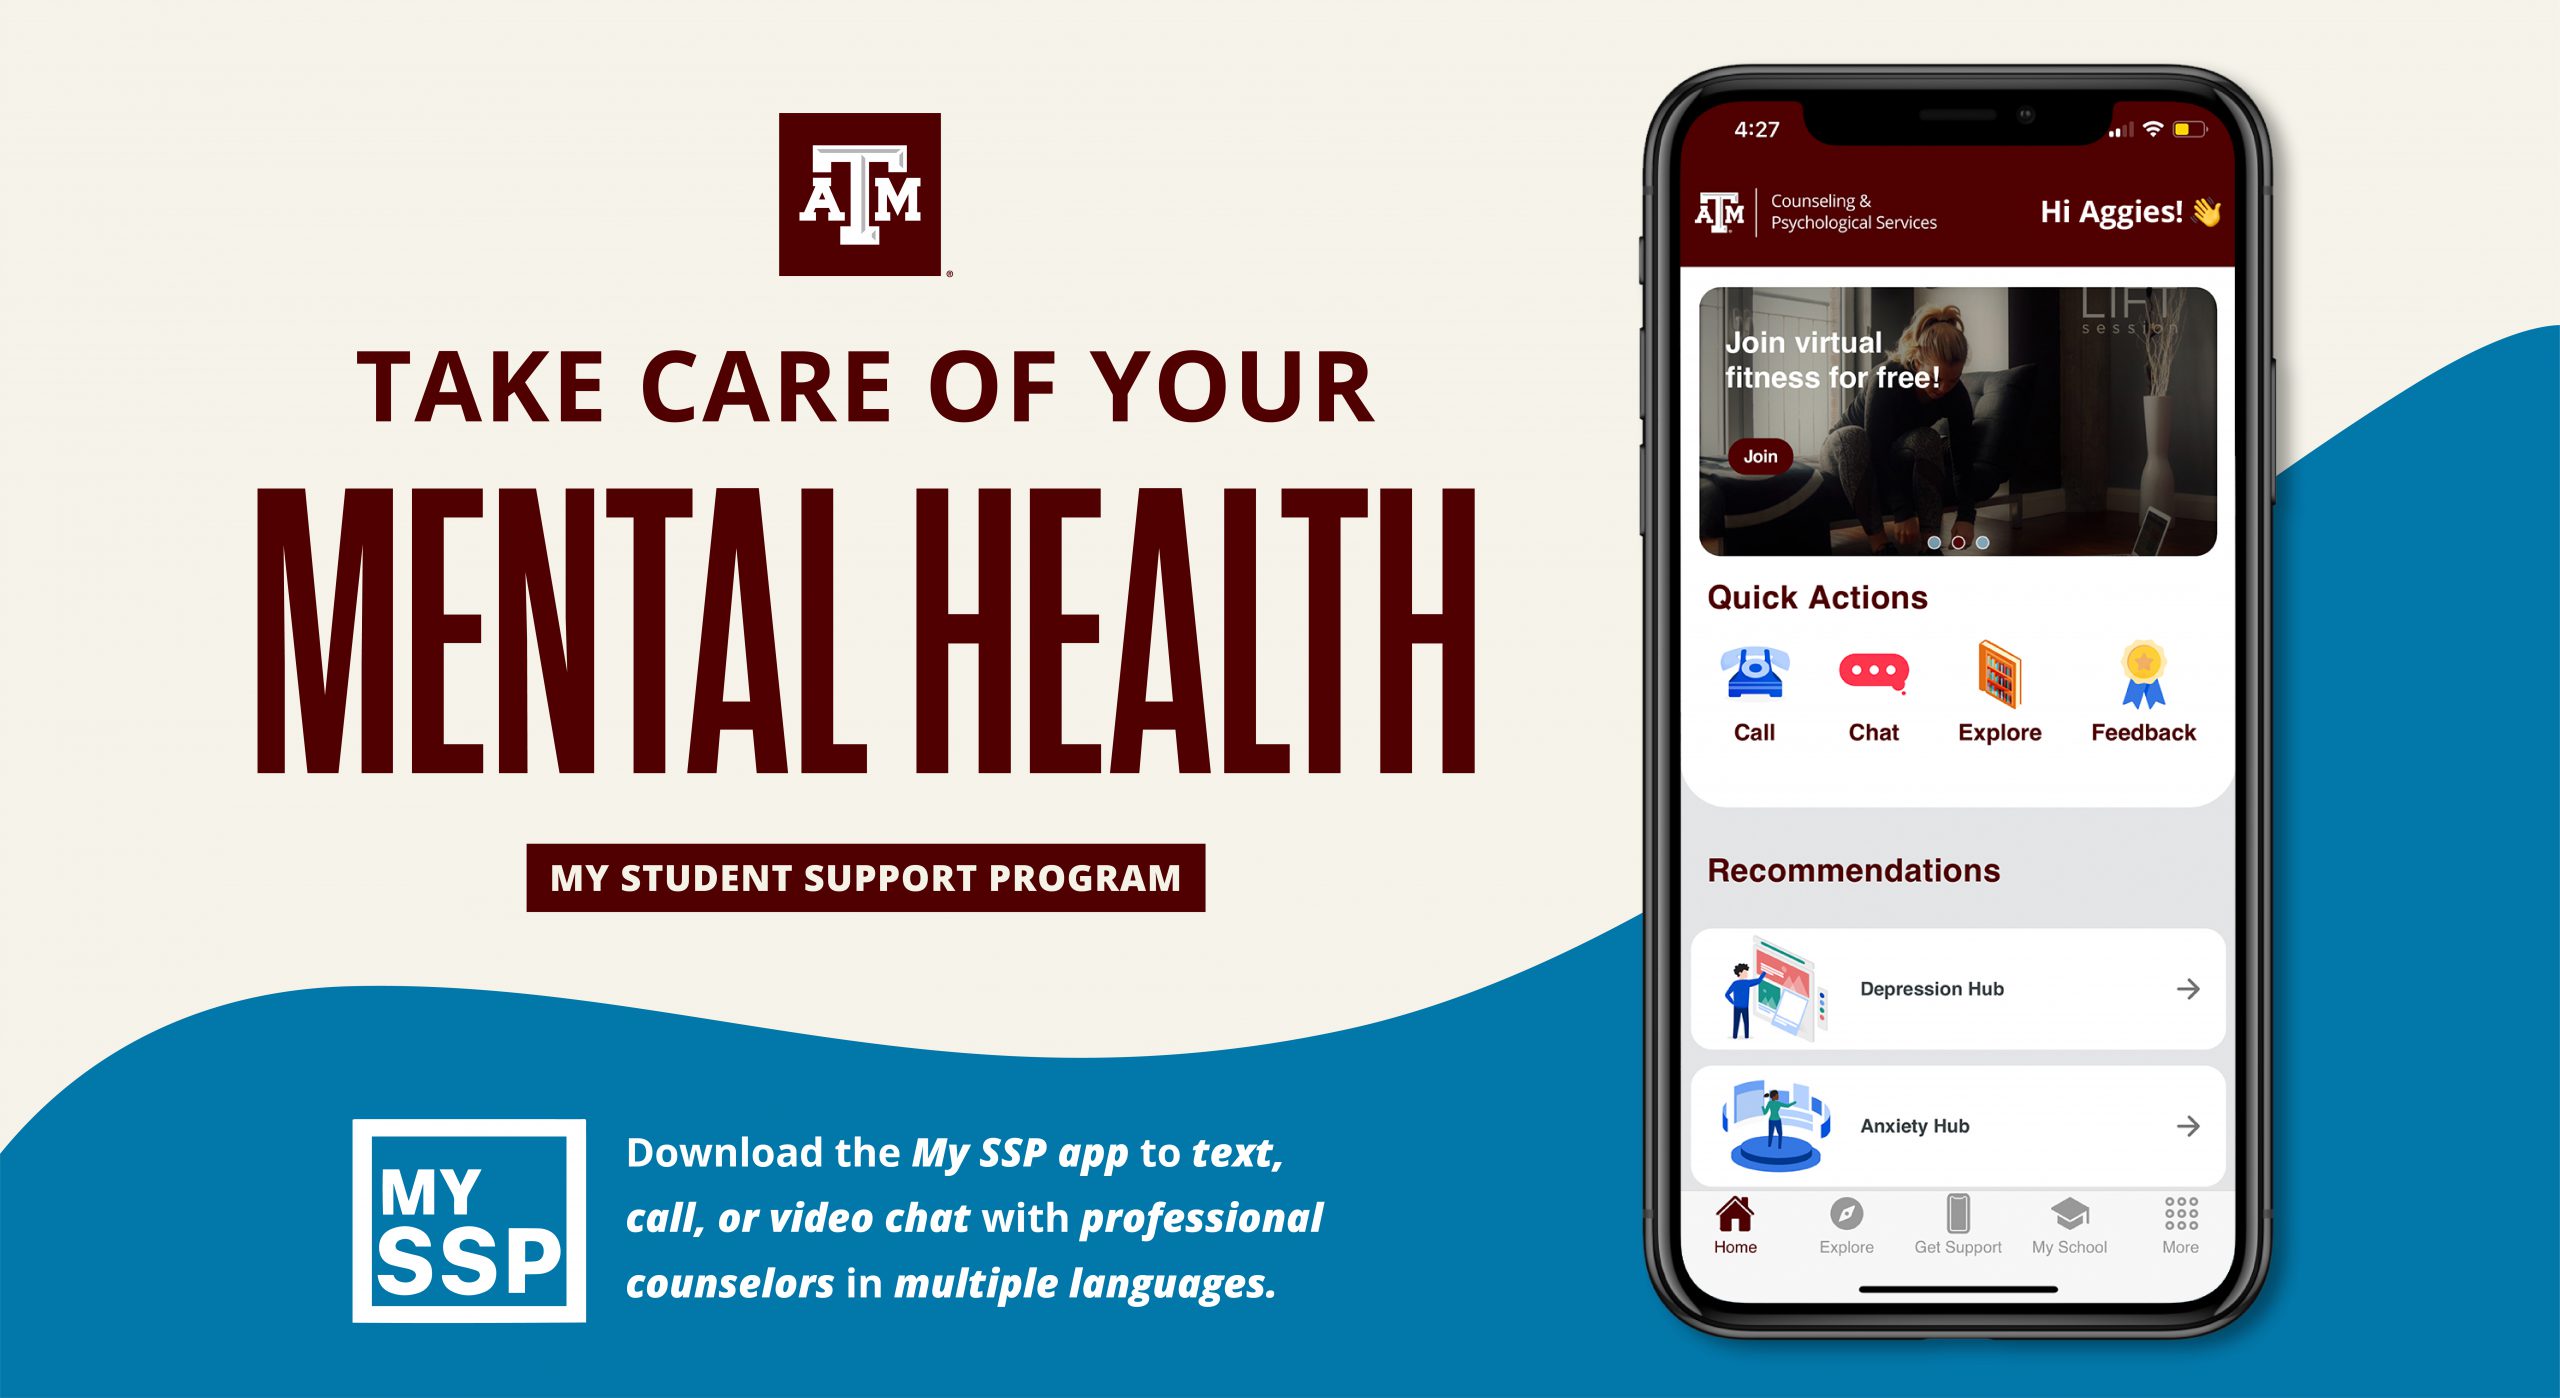 My SSP: My Student Support Program. Take care of your mental health. A phone demonstrates the maroon-themed home screen accessible to Texas A&M University My SSP users.